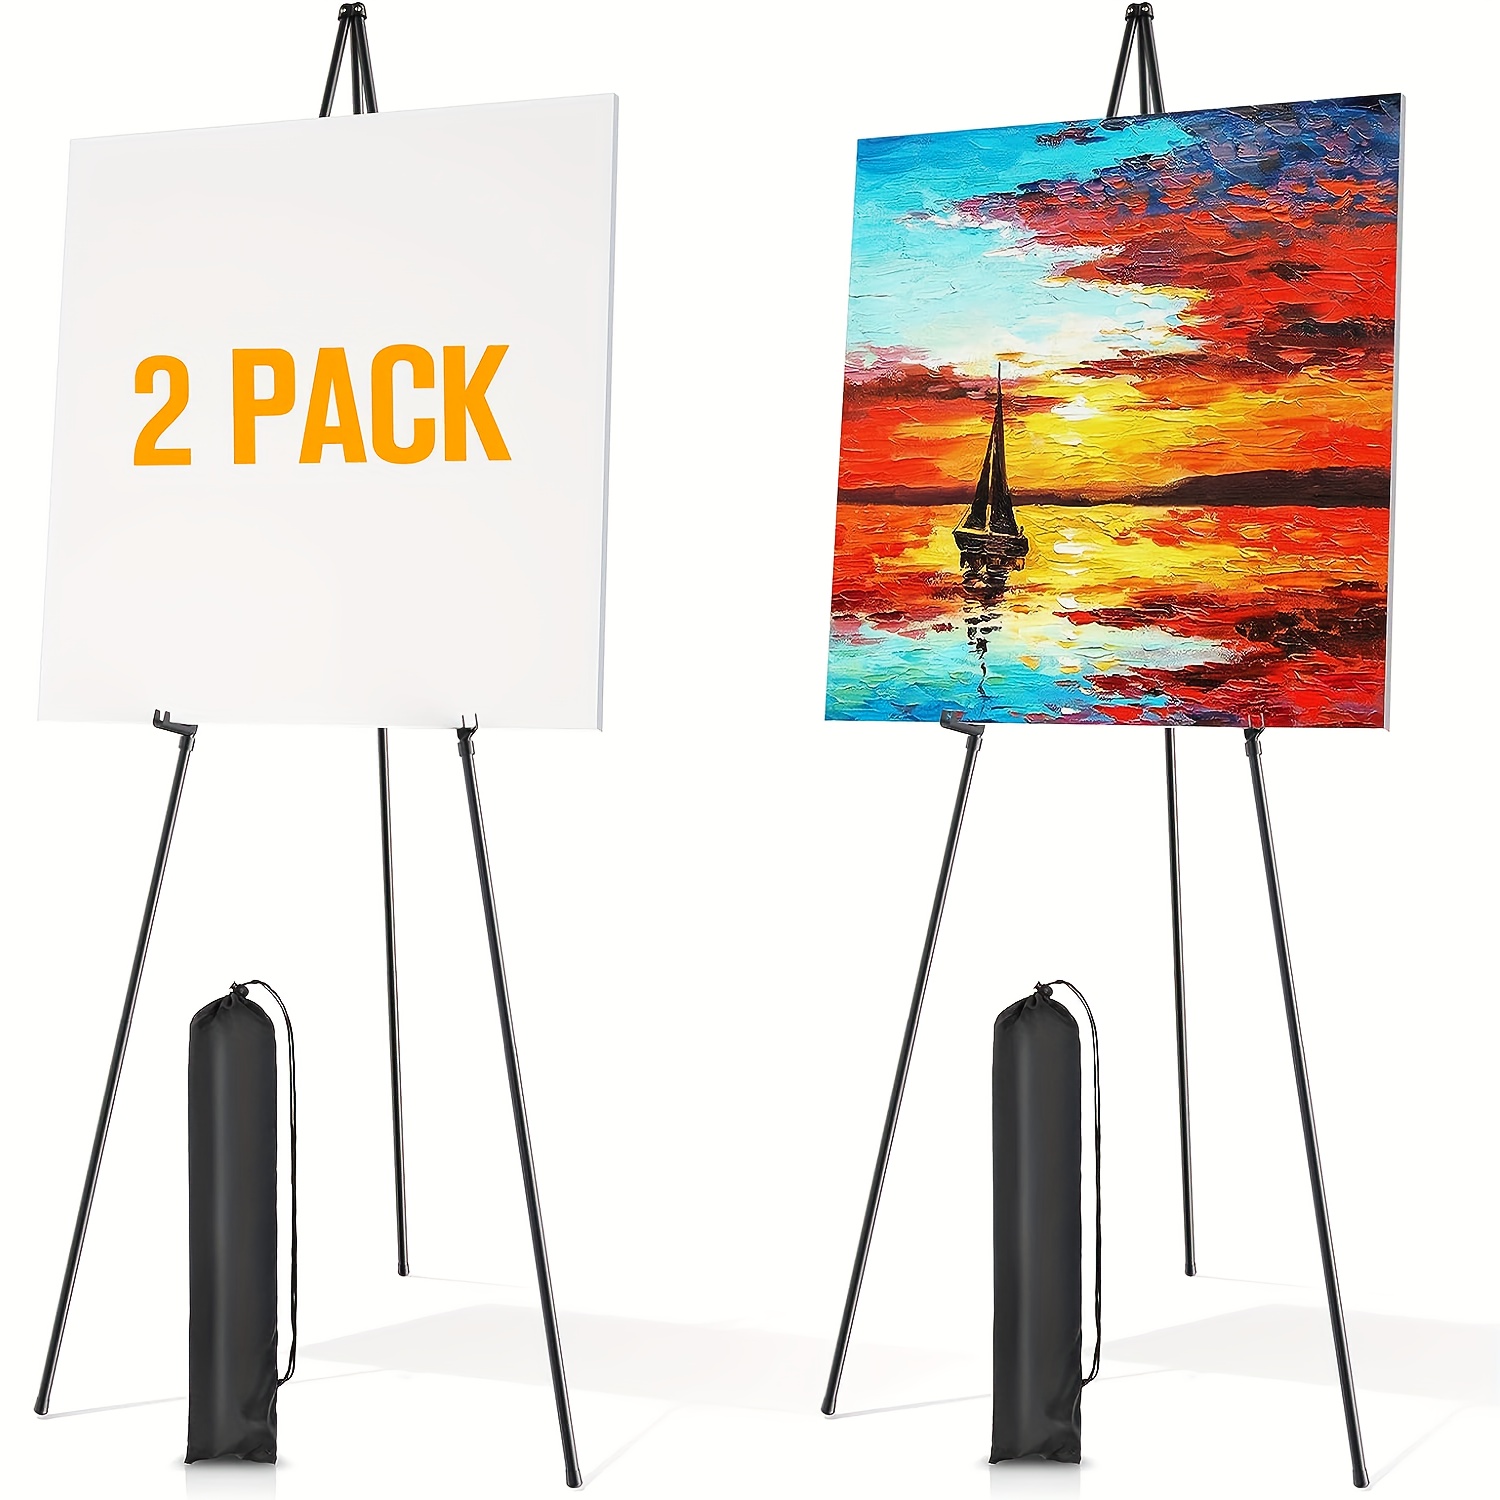 MEEDEN Easel Stand for Display, 63 Tripod Collapsible Artist Floor Easel,  Easy Folding Portable Metal Easel Stand for Signs, Posters, Display Show